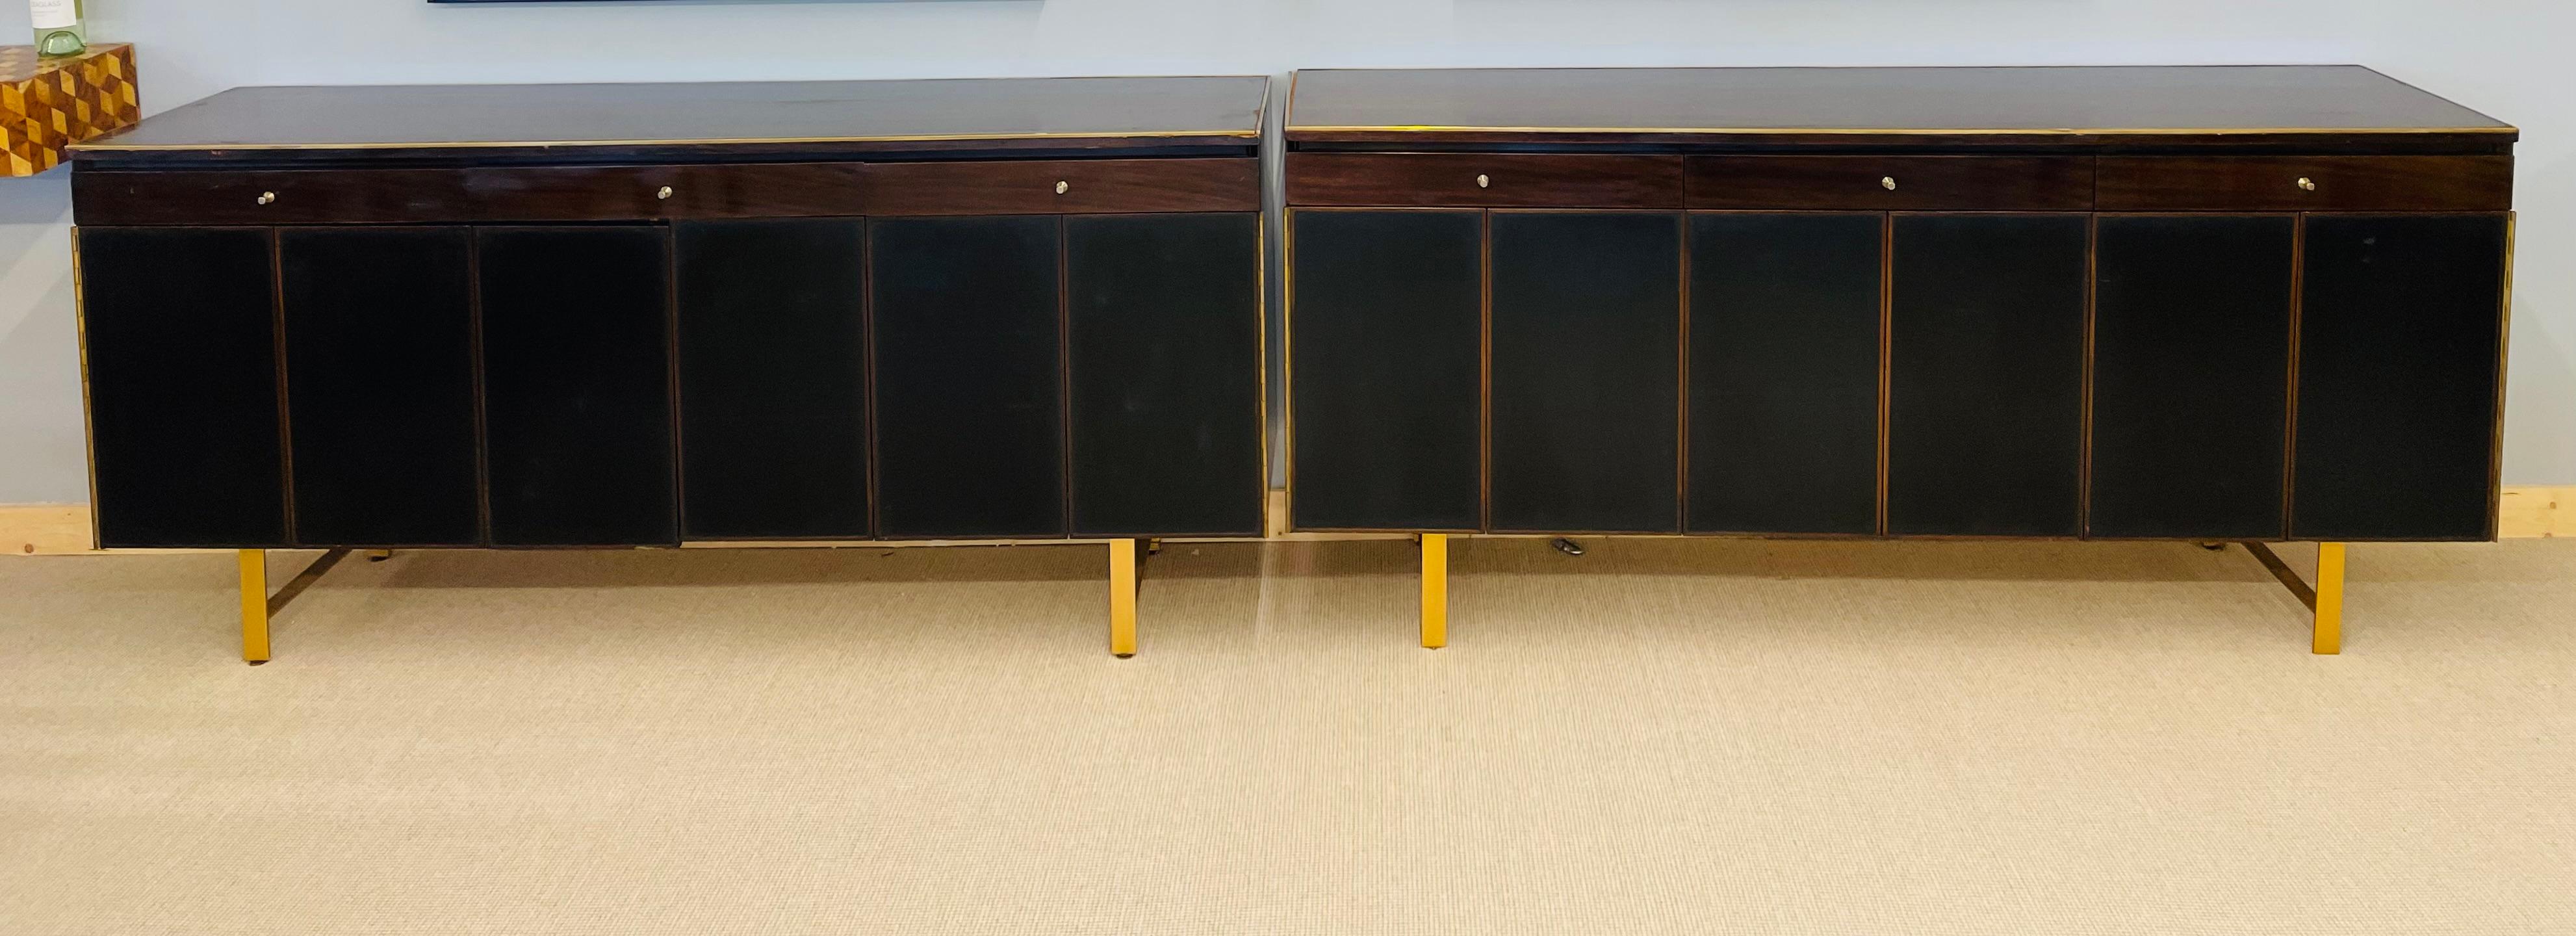 Pair of Mid-Century Modern credenzas / sideboards by Paul McCobb. Large and impressive pair of sideboards or credenzas by this highly sought after designer. The pair having Piano Hinged doors and brass framed tops with interior shelves under a set